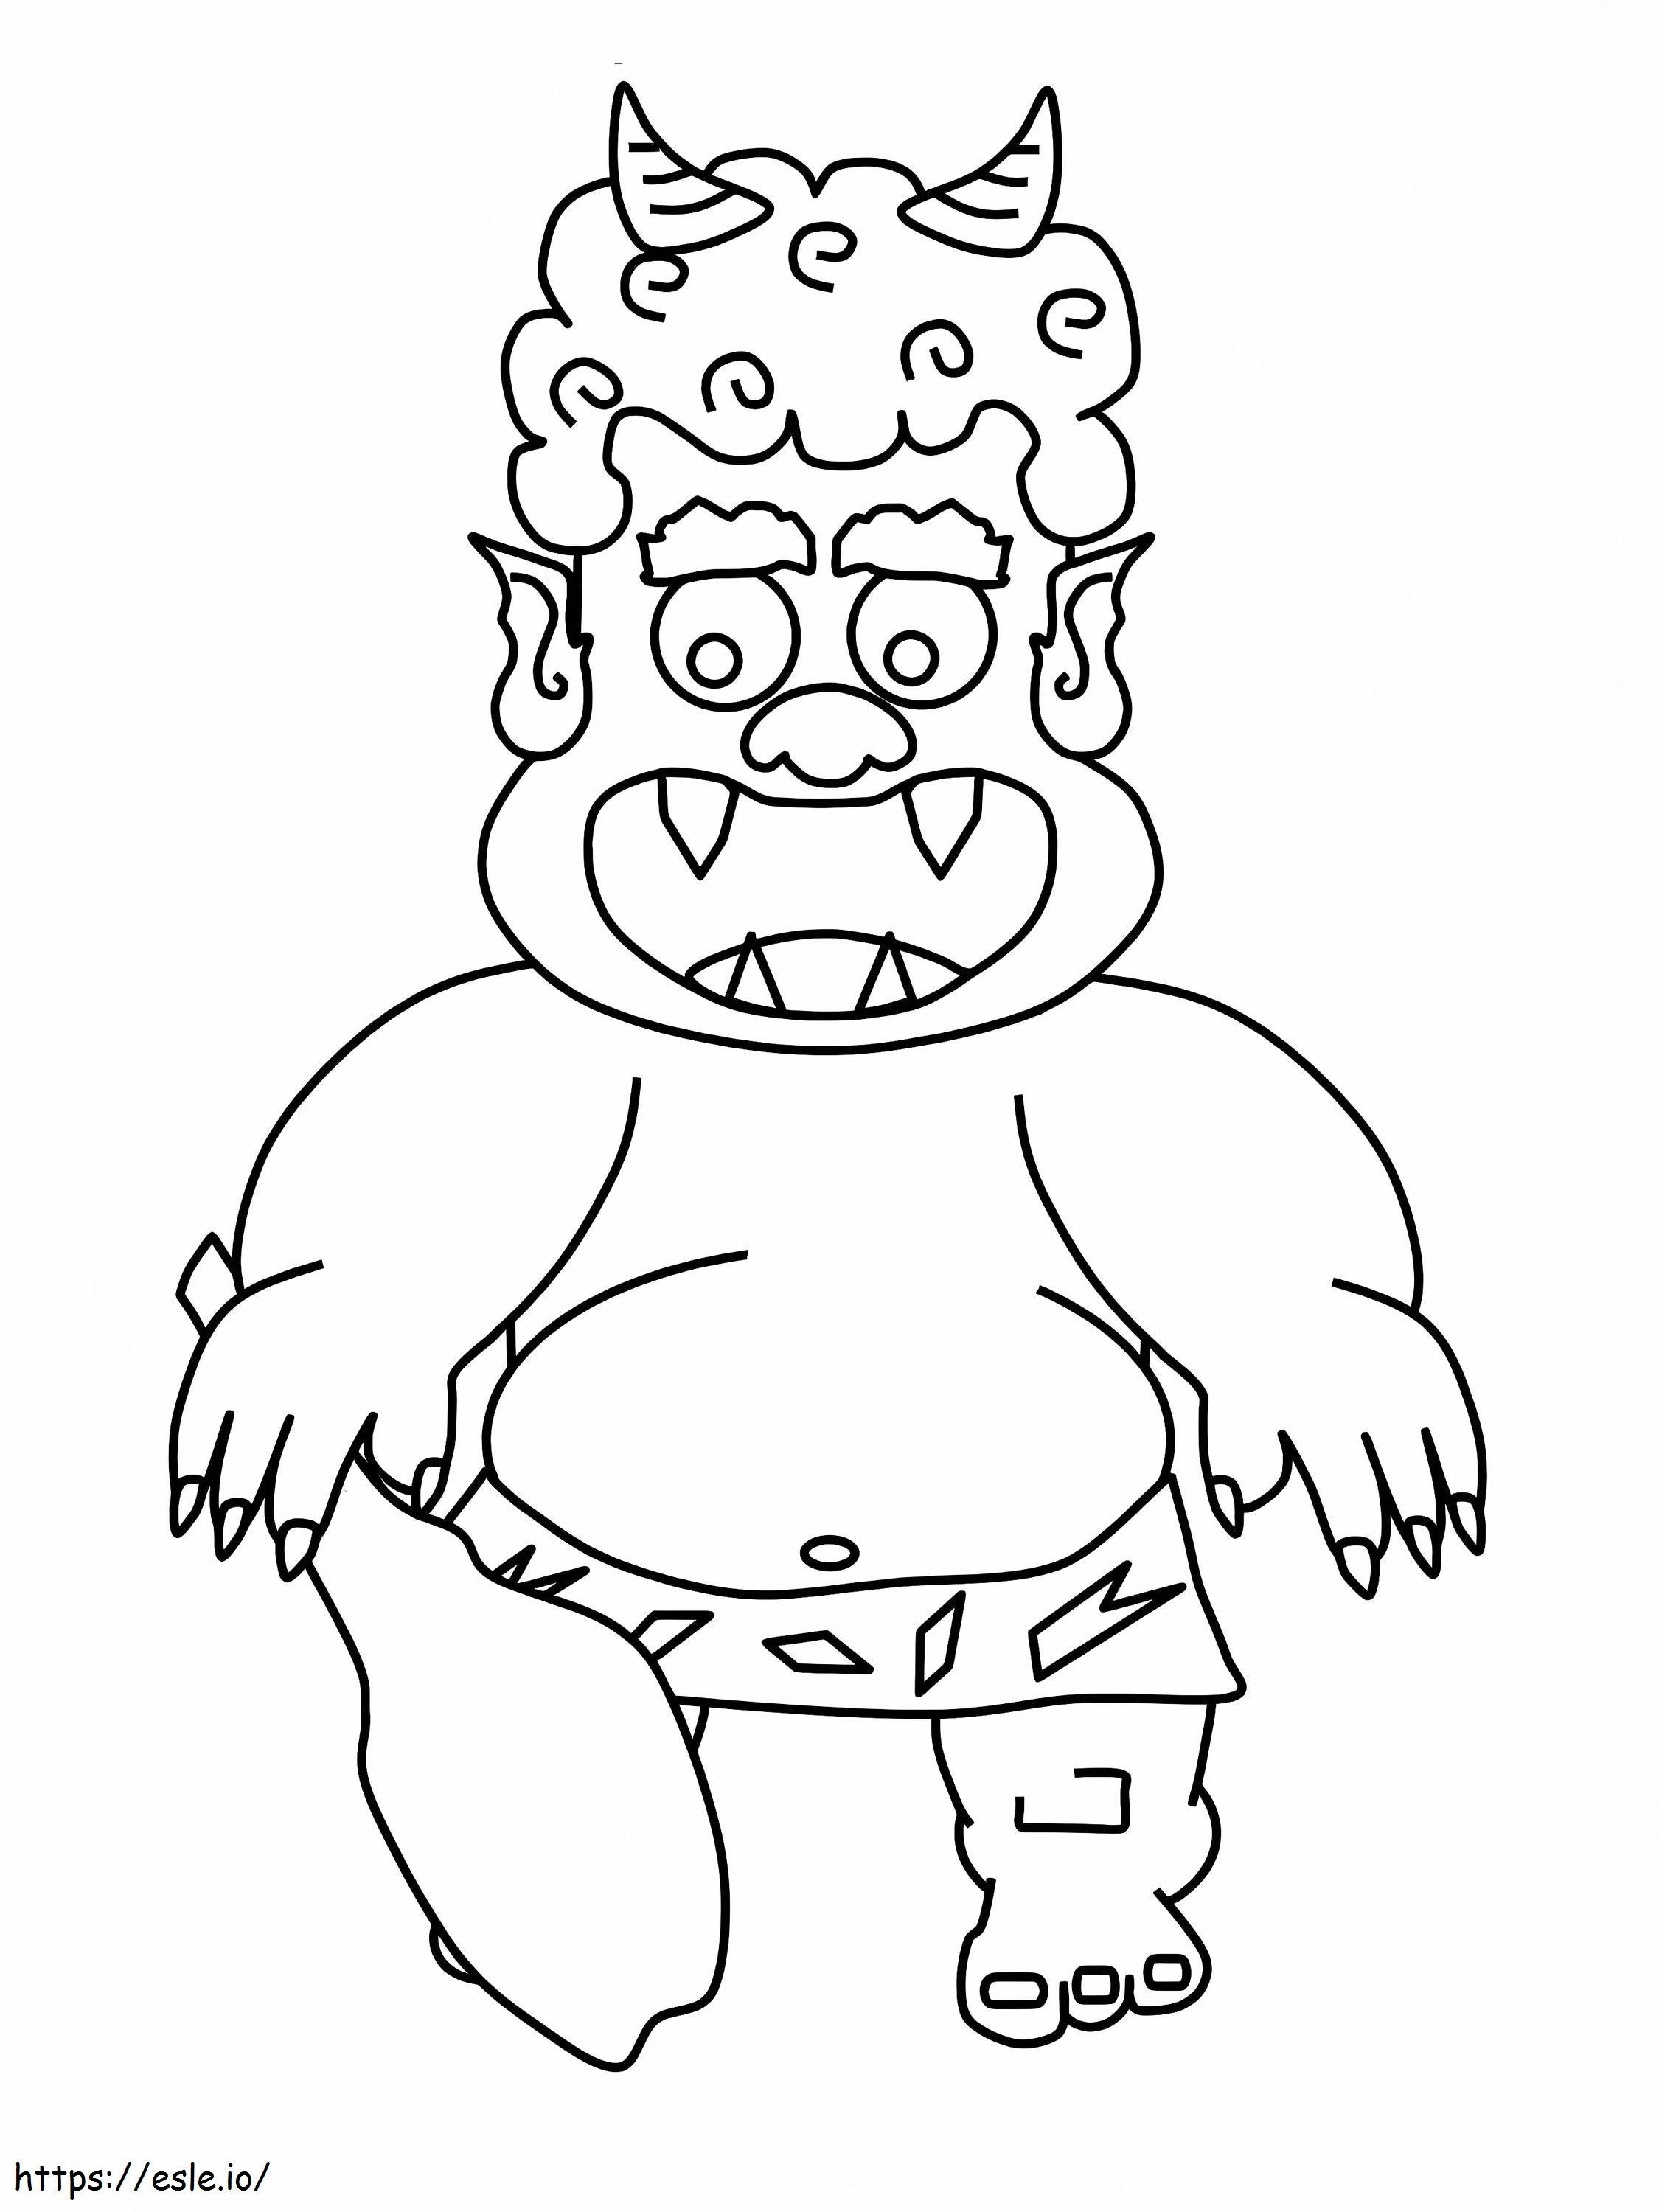 The Oni From Momotaro coloring page